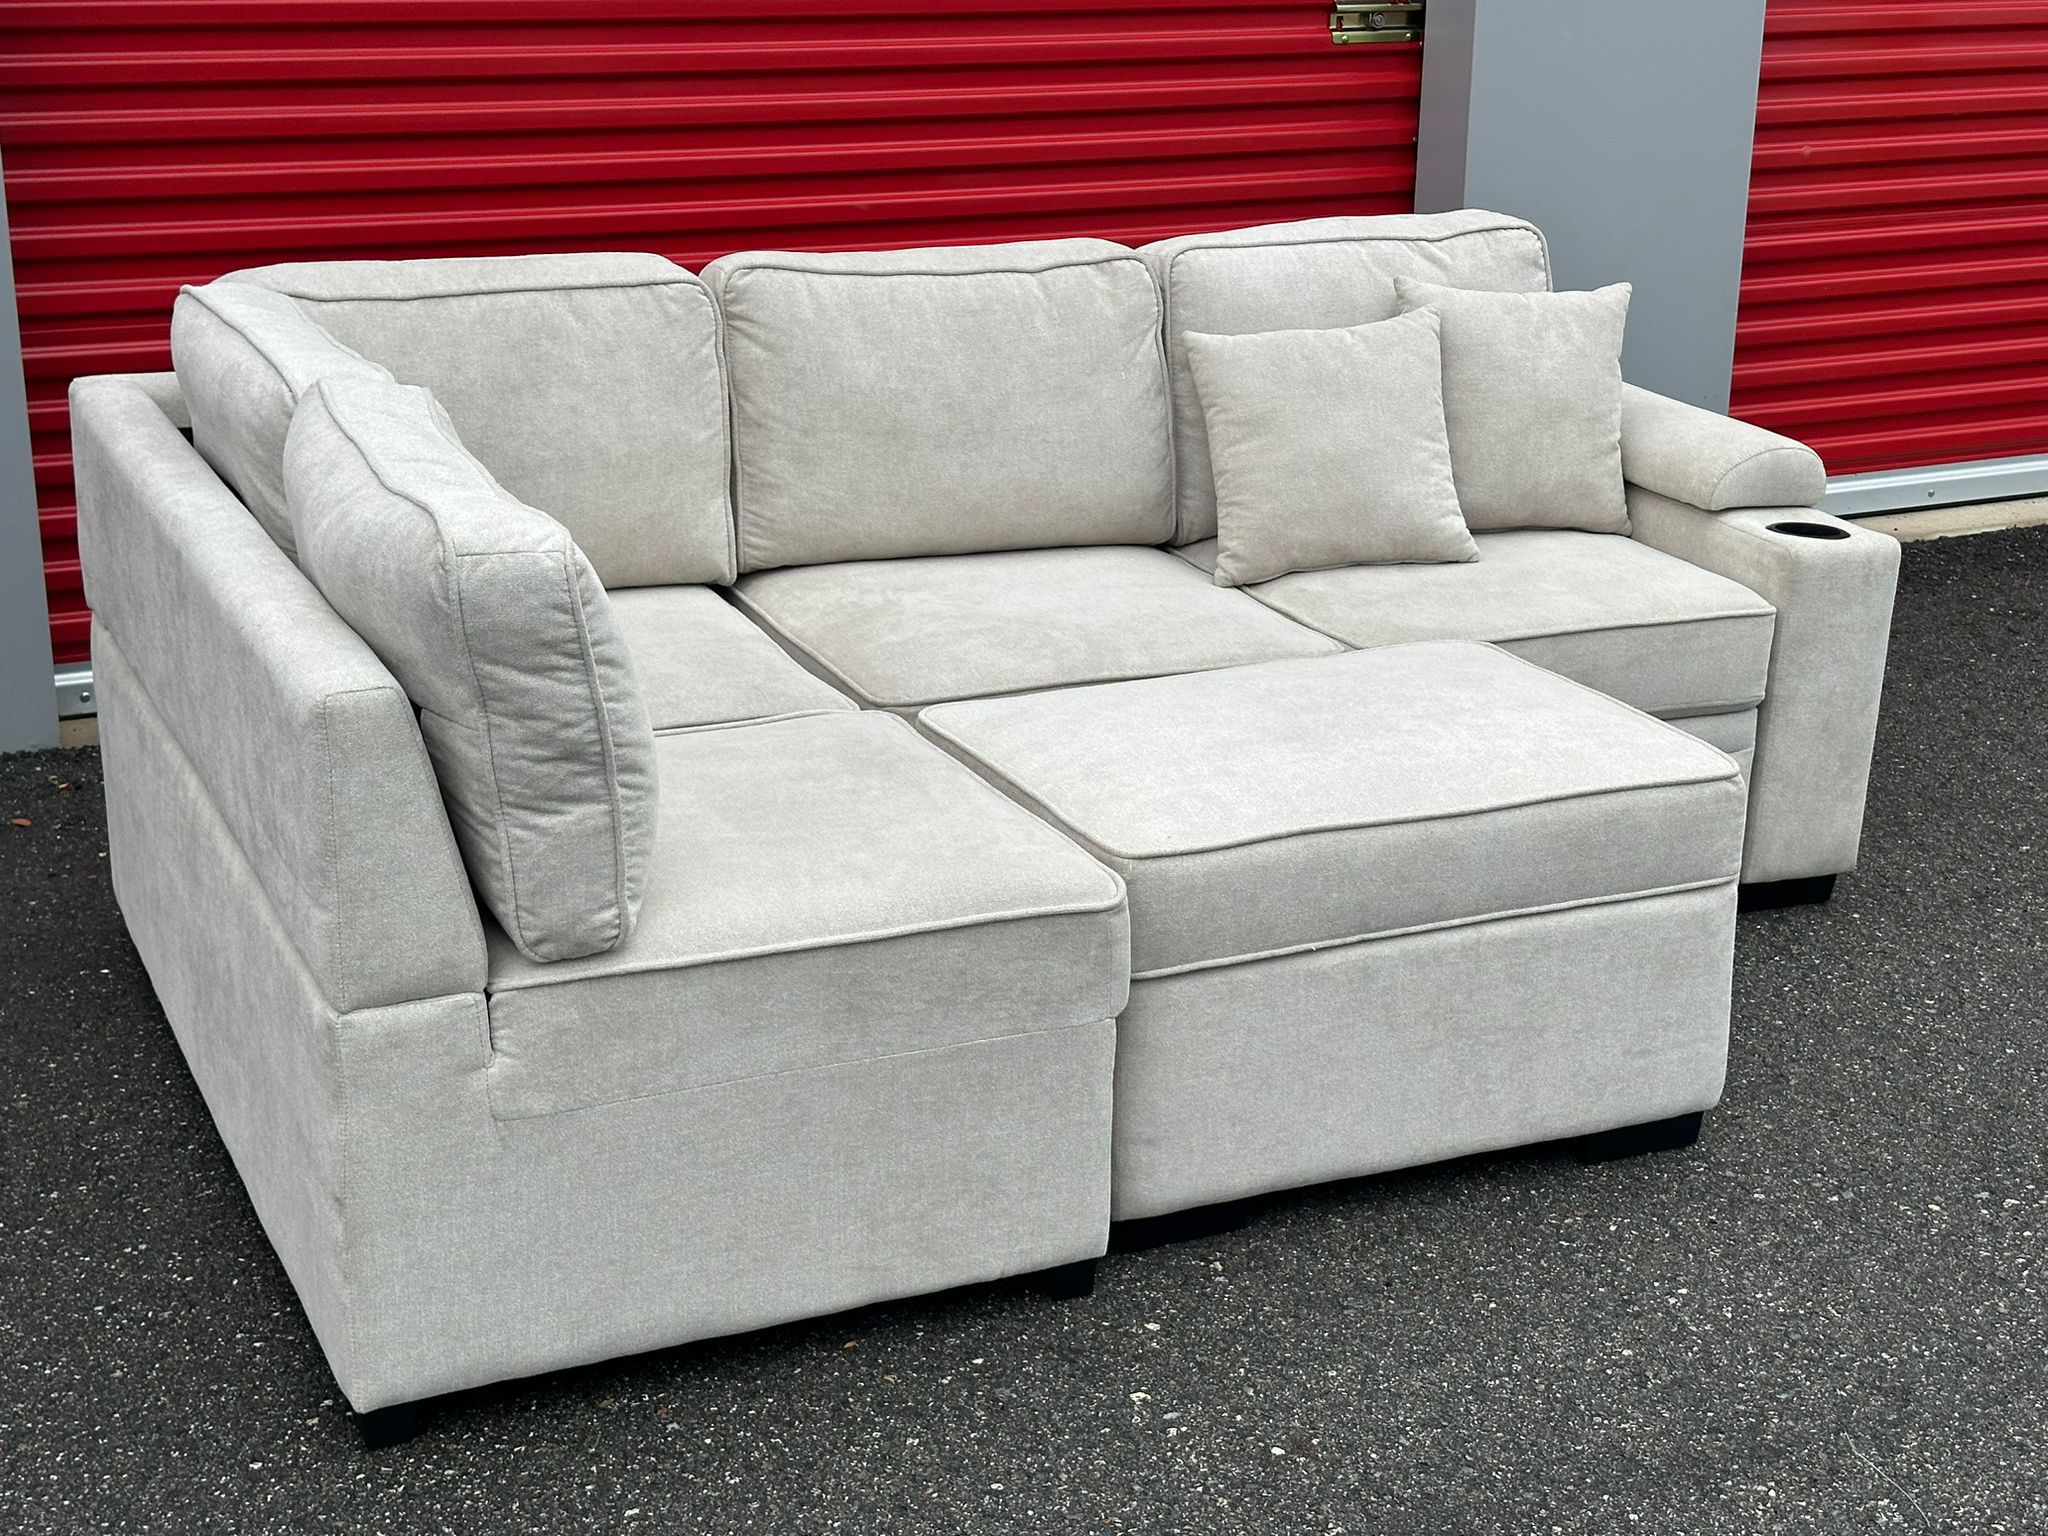 LIKE NEW PULL OUT BEIGE SECTIONAL COUCH WITH STORAGE OTTOMAN - POWER CHARGER - DELIVERY AVAILABLE 🚚